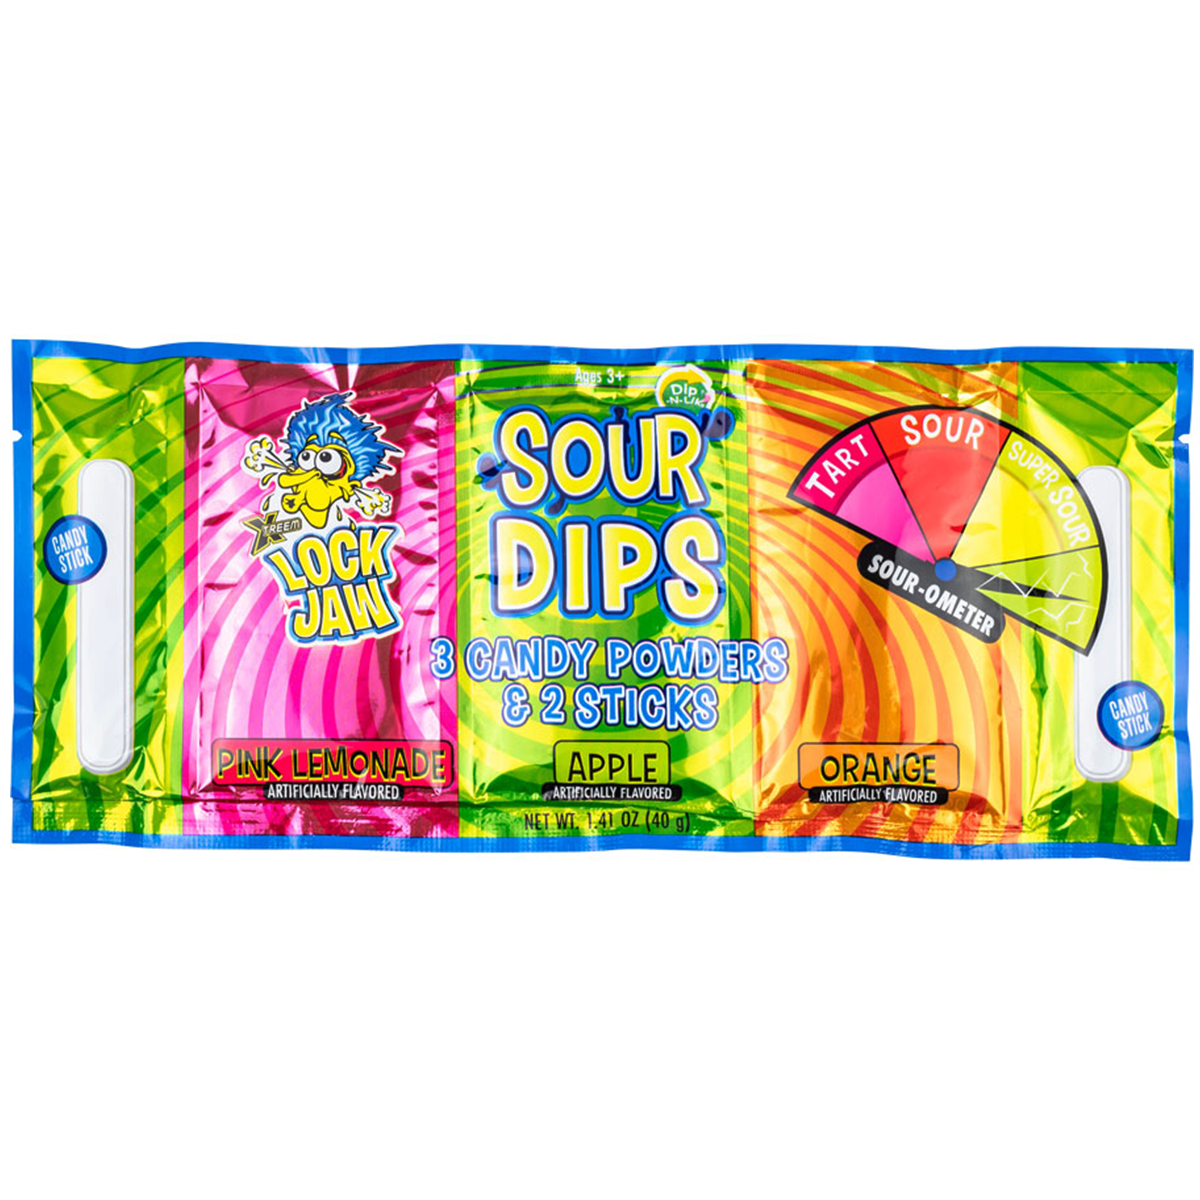 Xtreme Lock Jaw® Sour Dips Candy